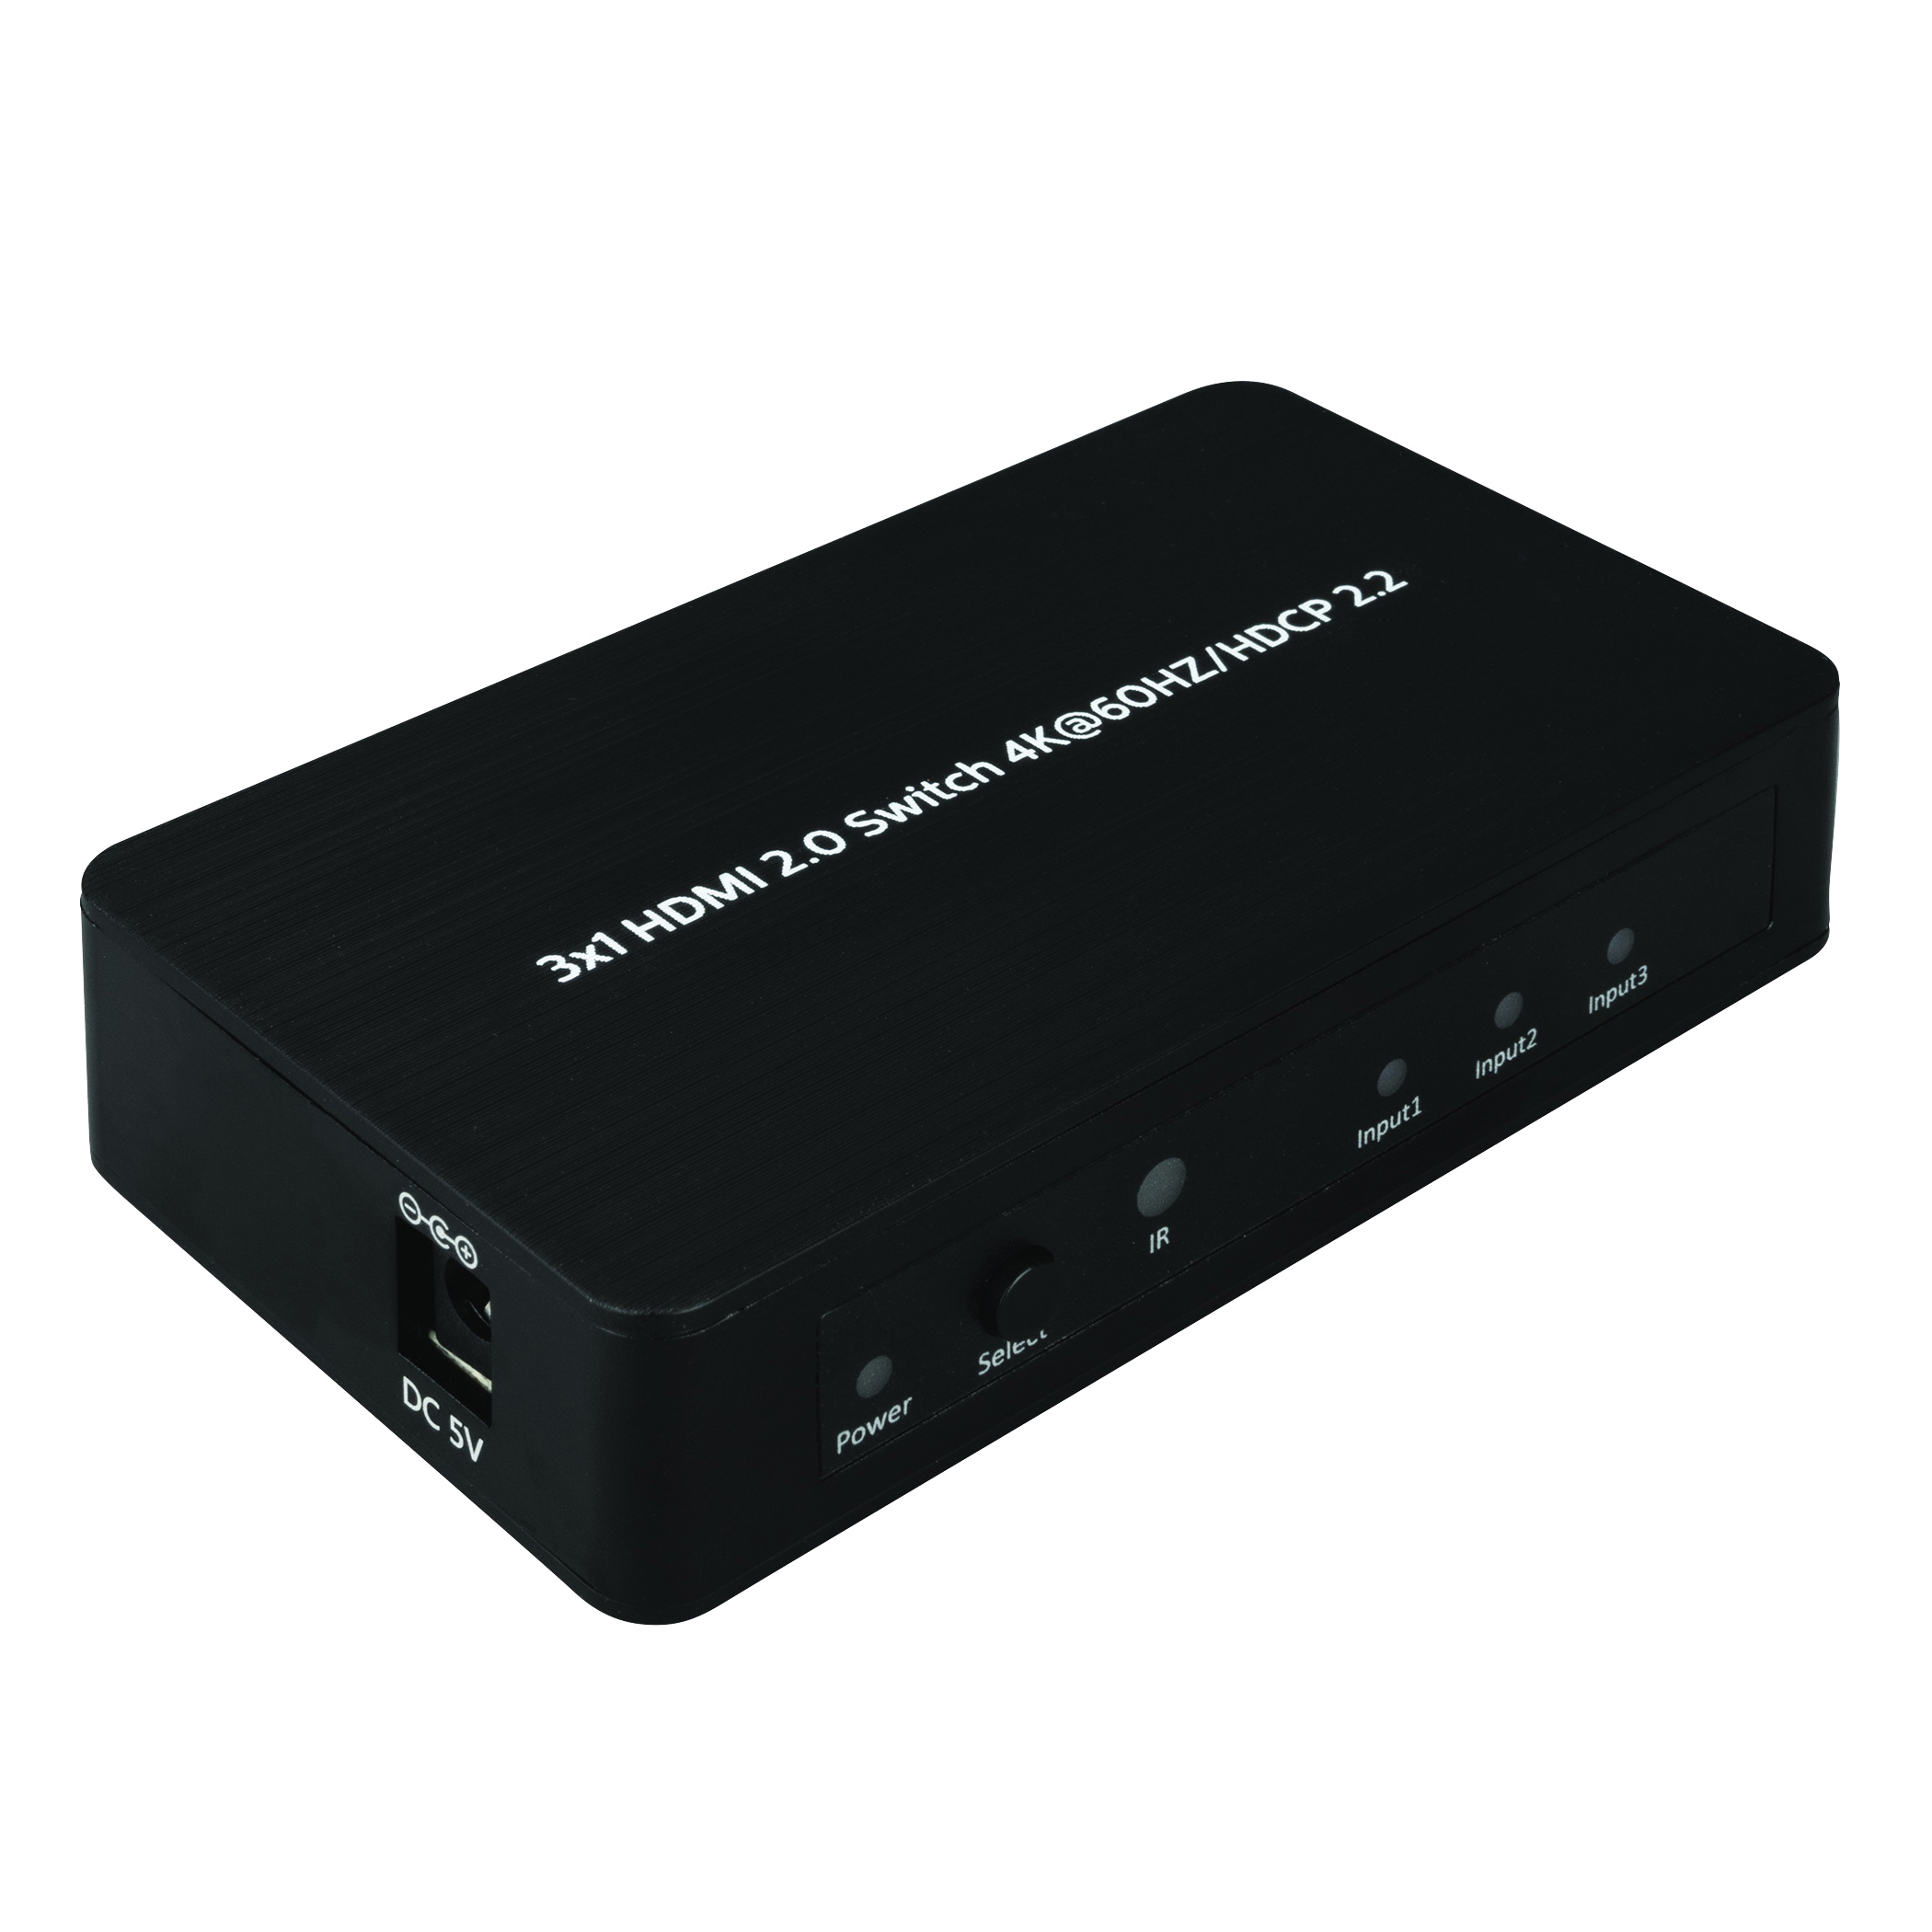 Just Hook It Up JHIU0128 HDMI Switch With Remote Control, Black Housing - 2